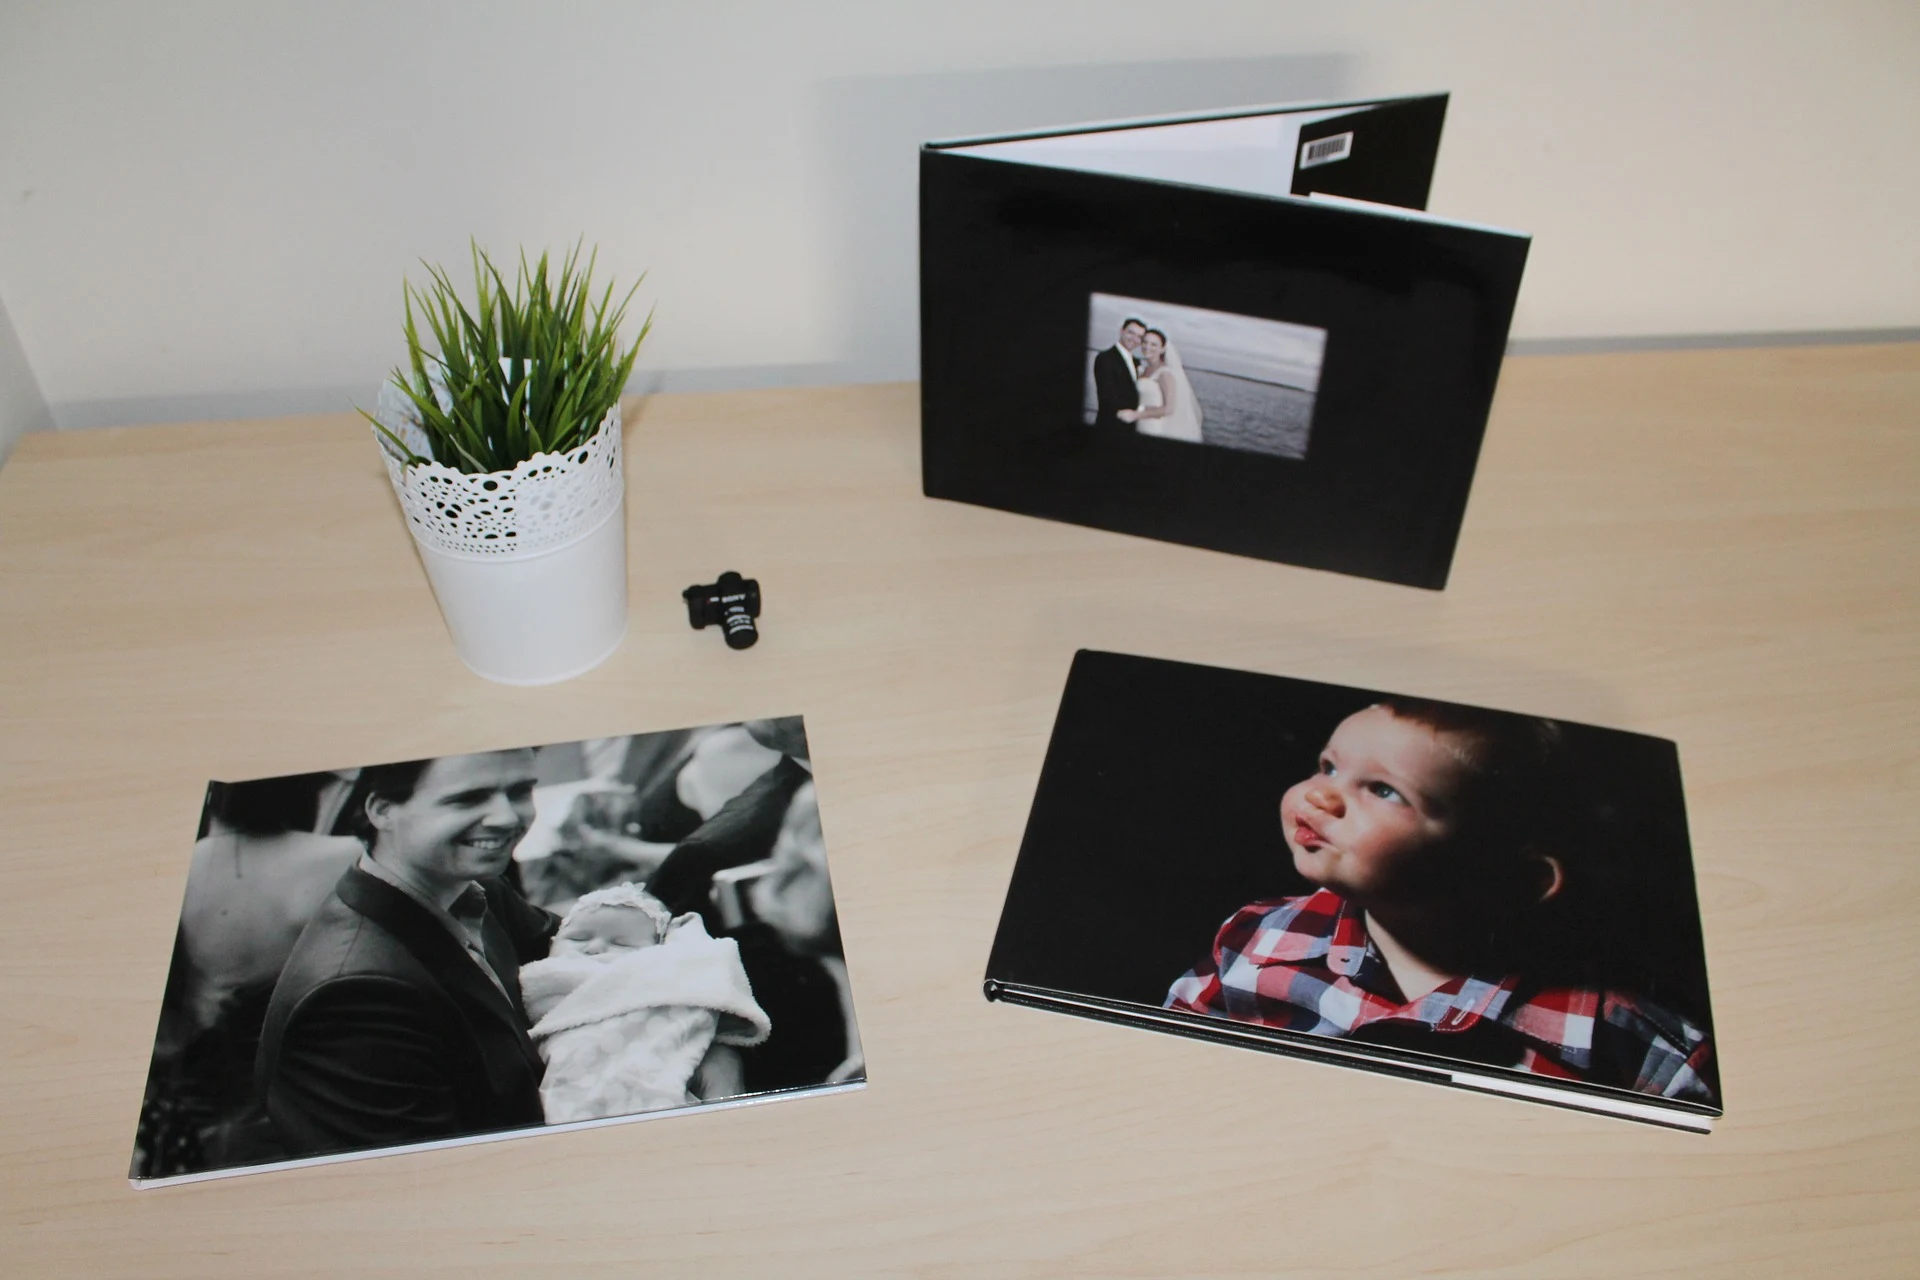 Free stock image from Pixabay of family photo albums